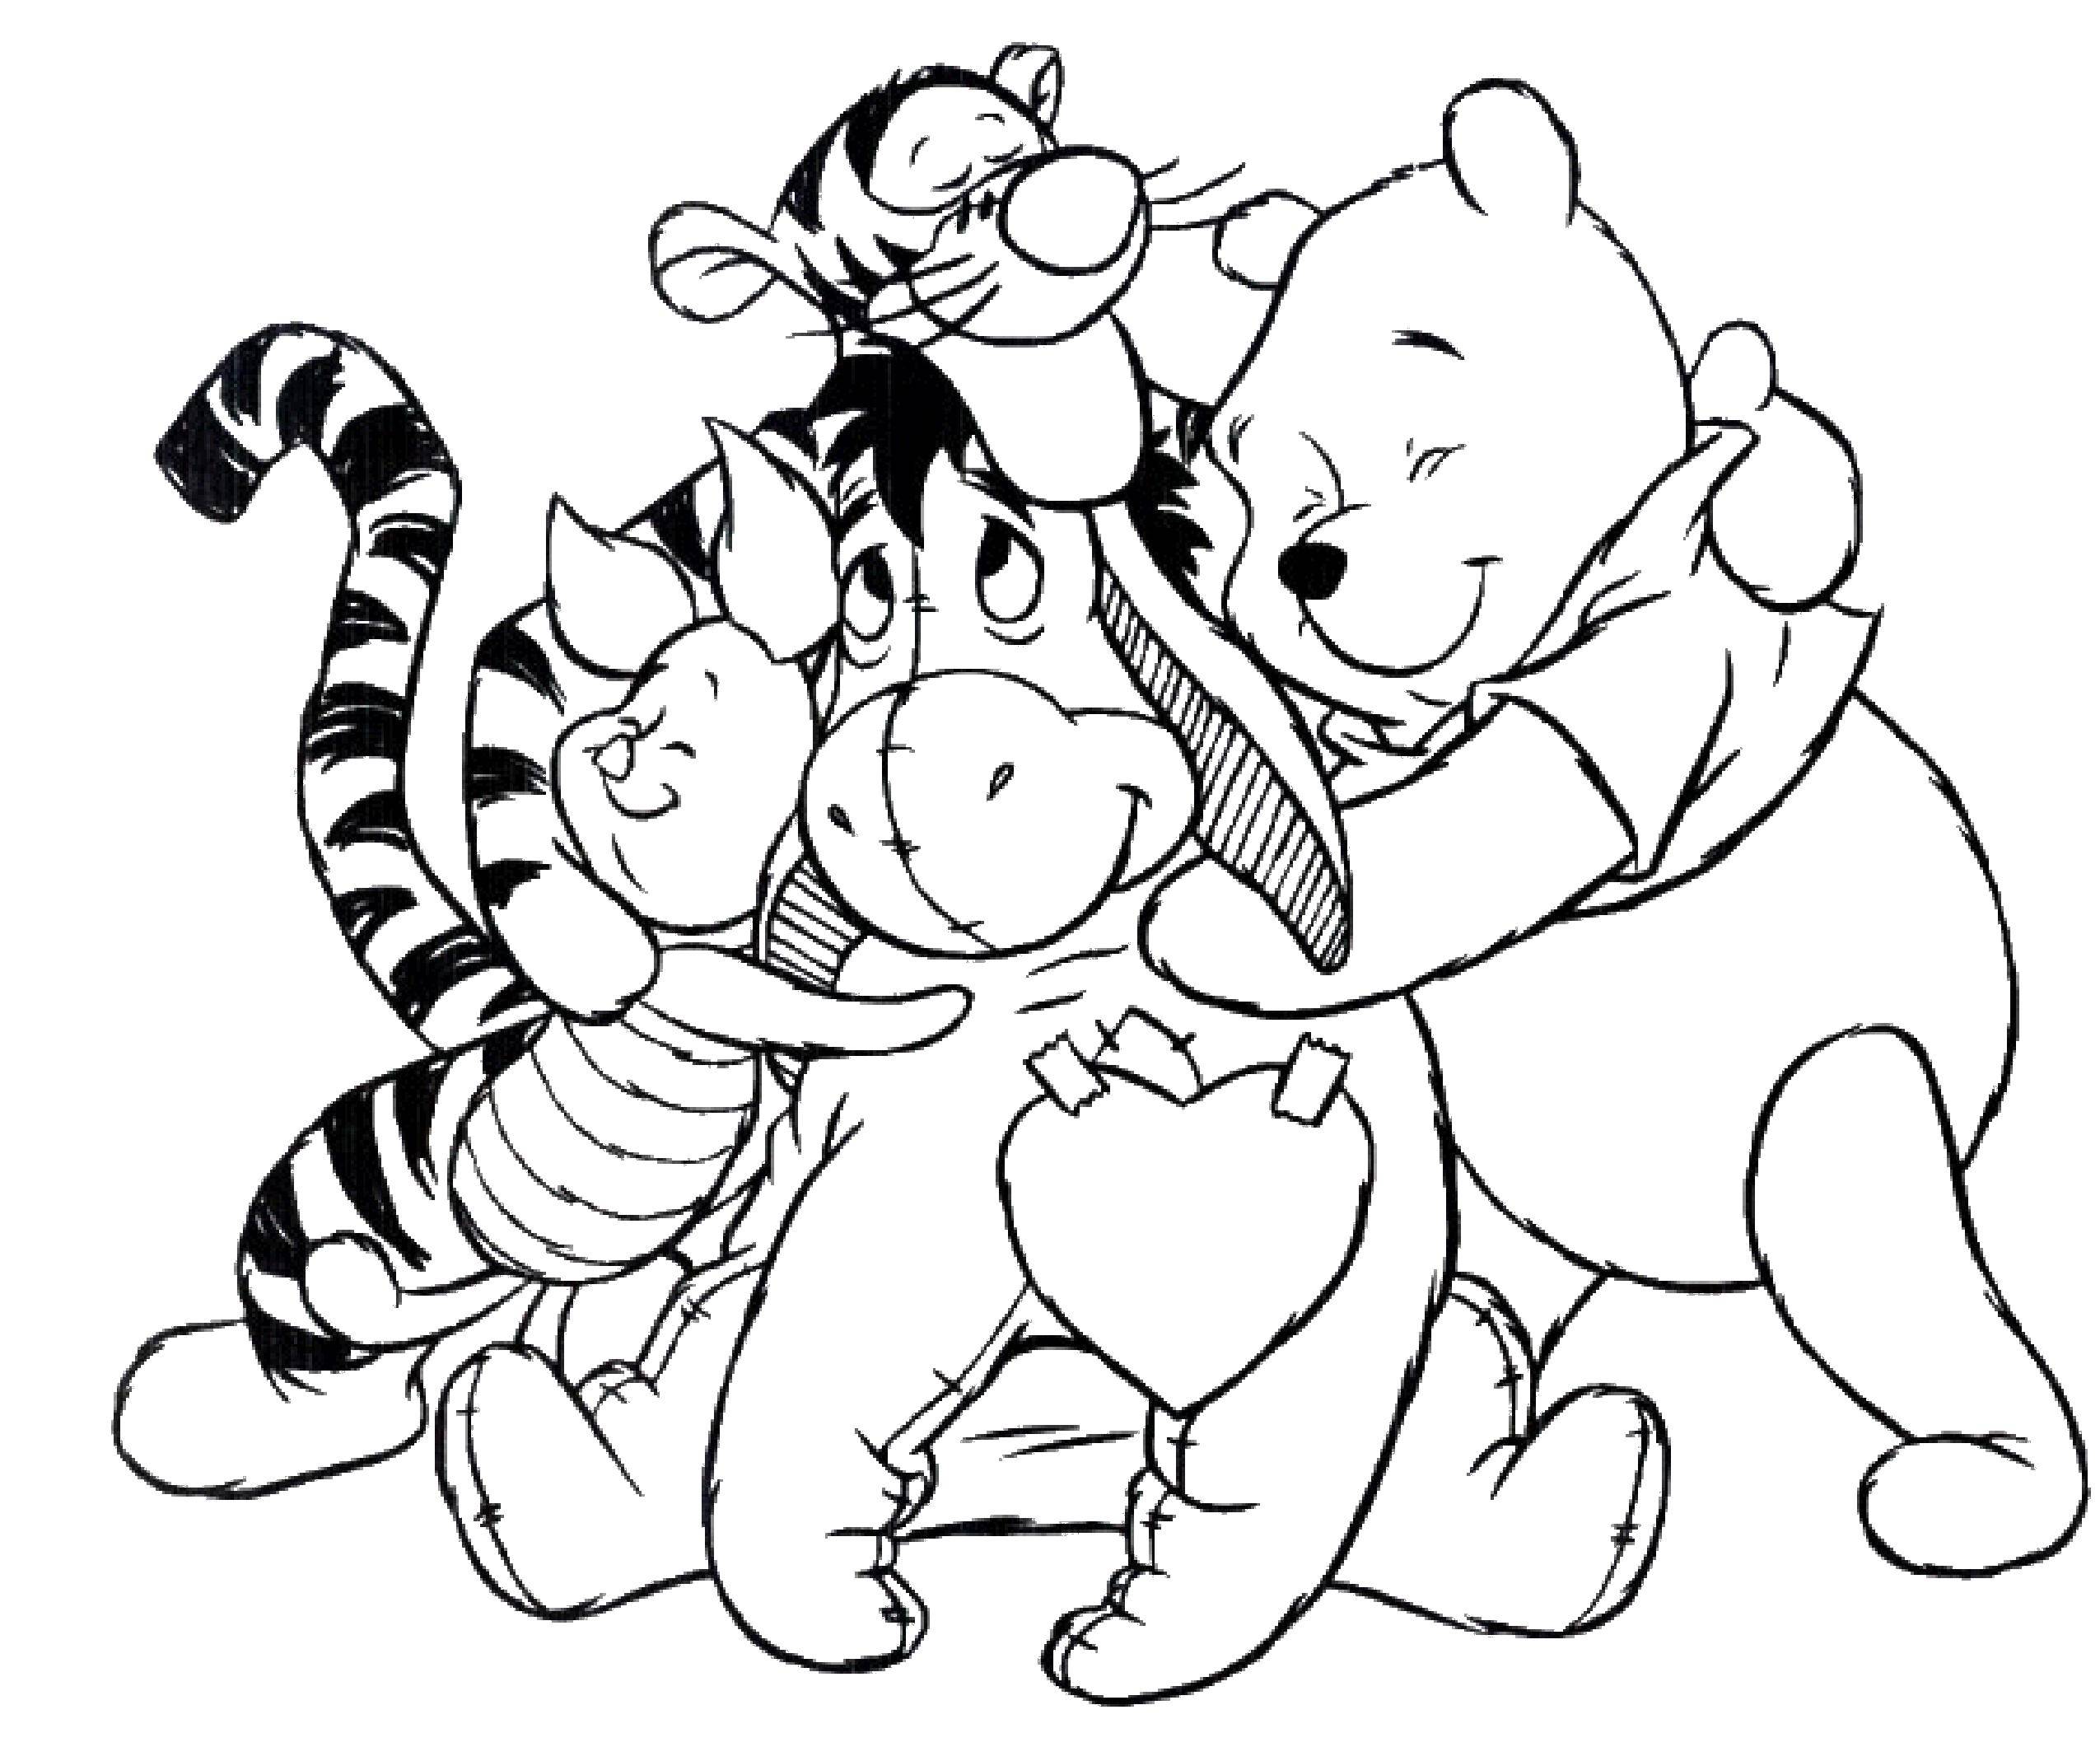 Coloring Winnie the Pooh and company. Category coloring. Tags:  Cartoon character, Winnie the Pooh.